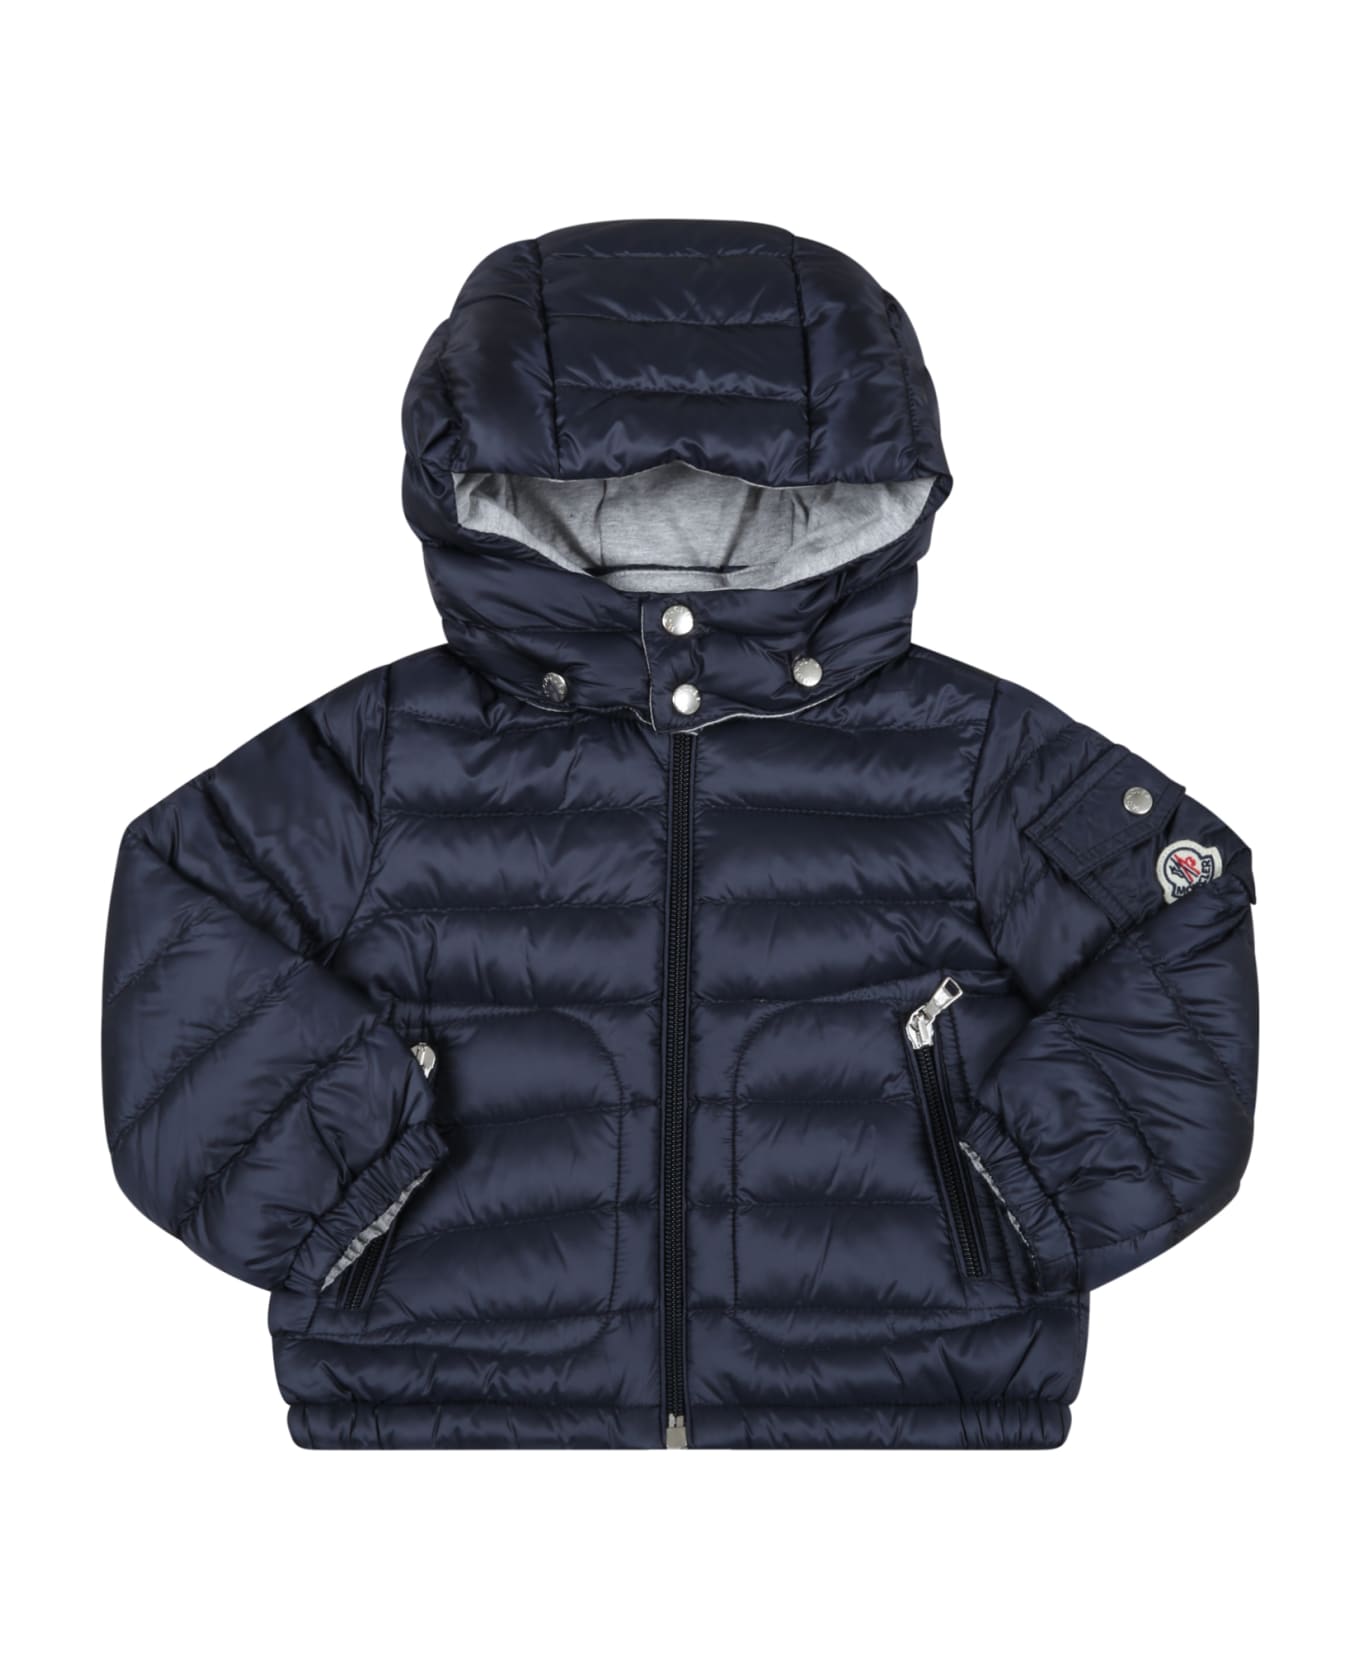 Moncler Blue 'lauros' Jacket For Baby Boy With Logo Patch - NAVY